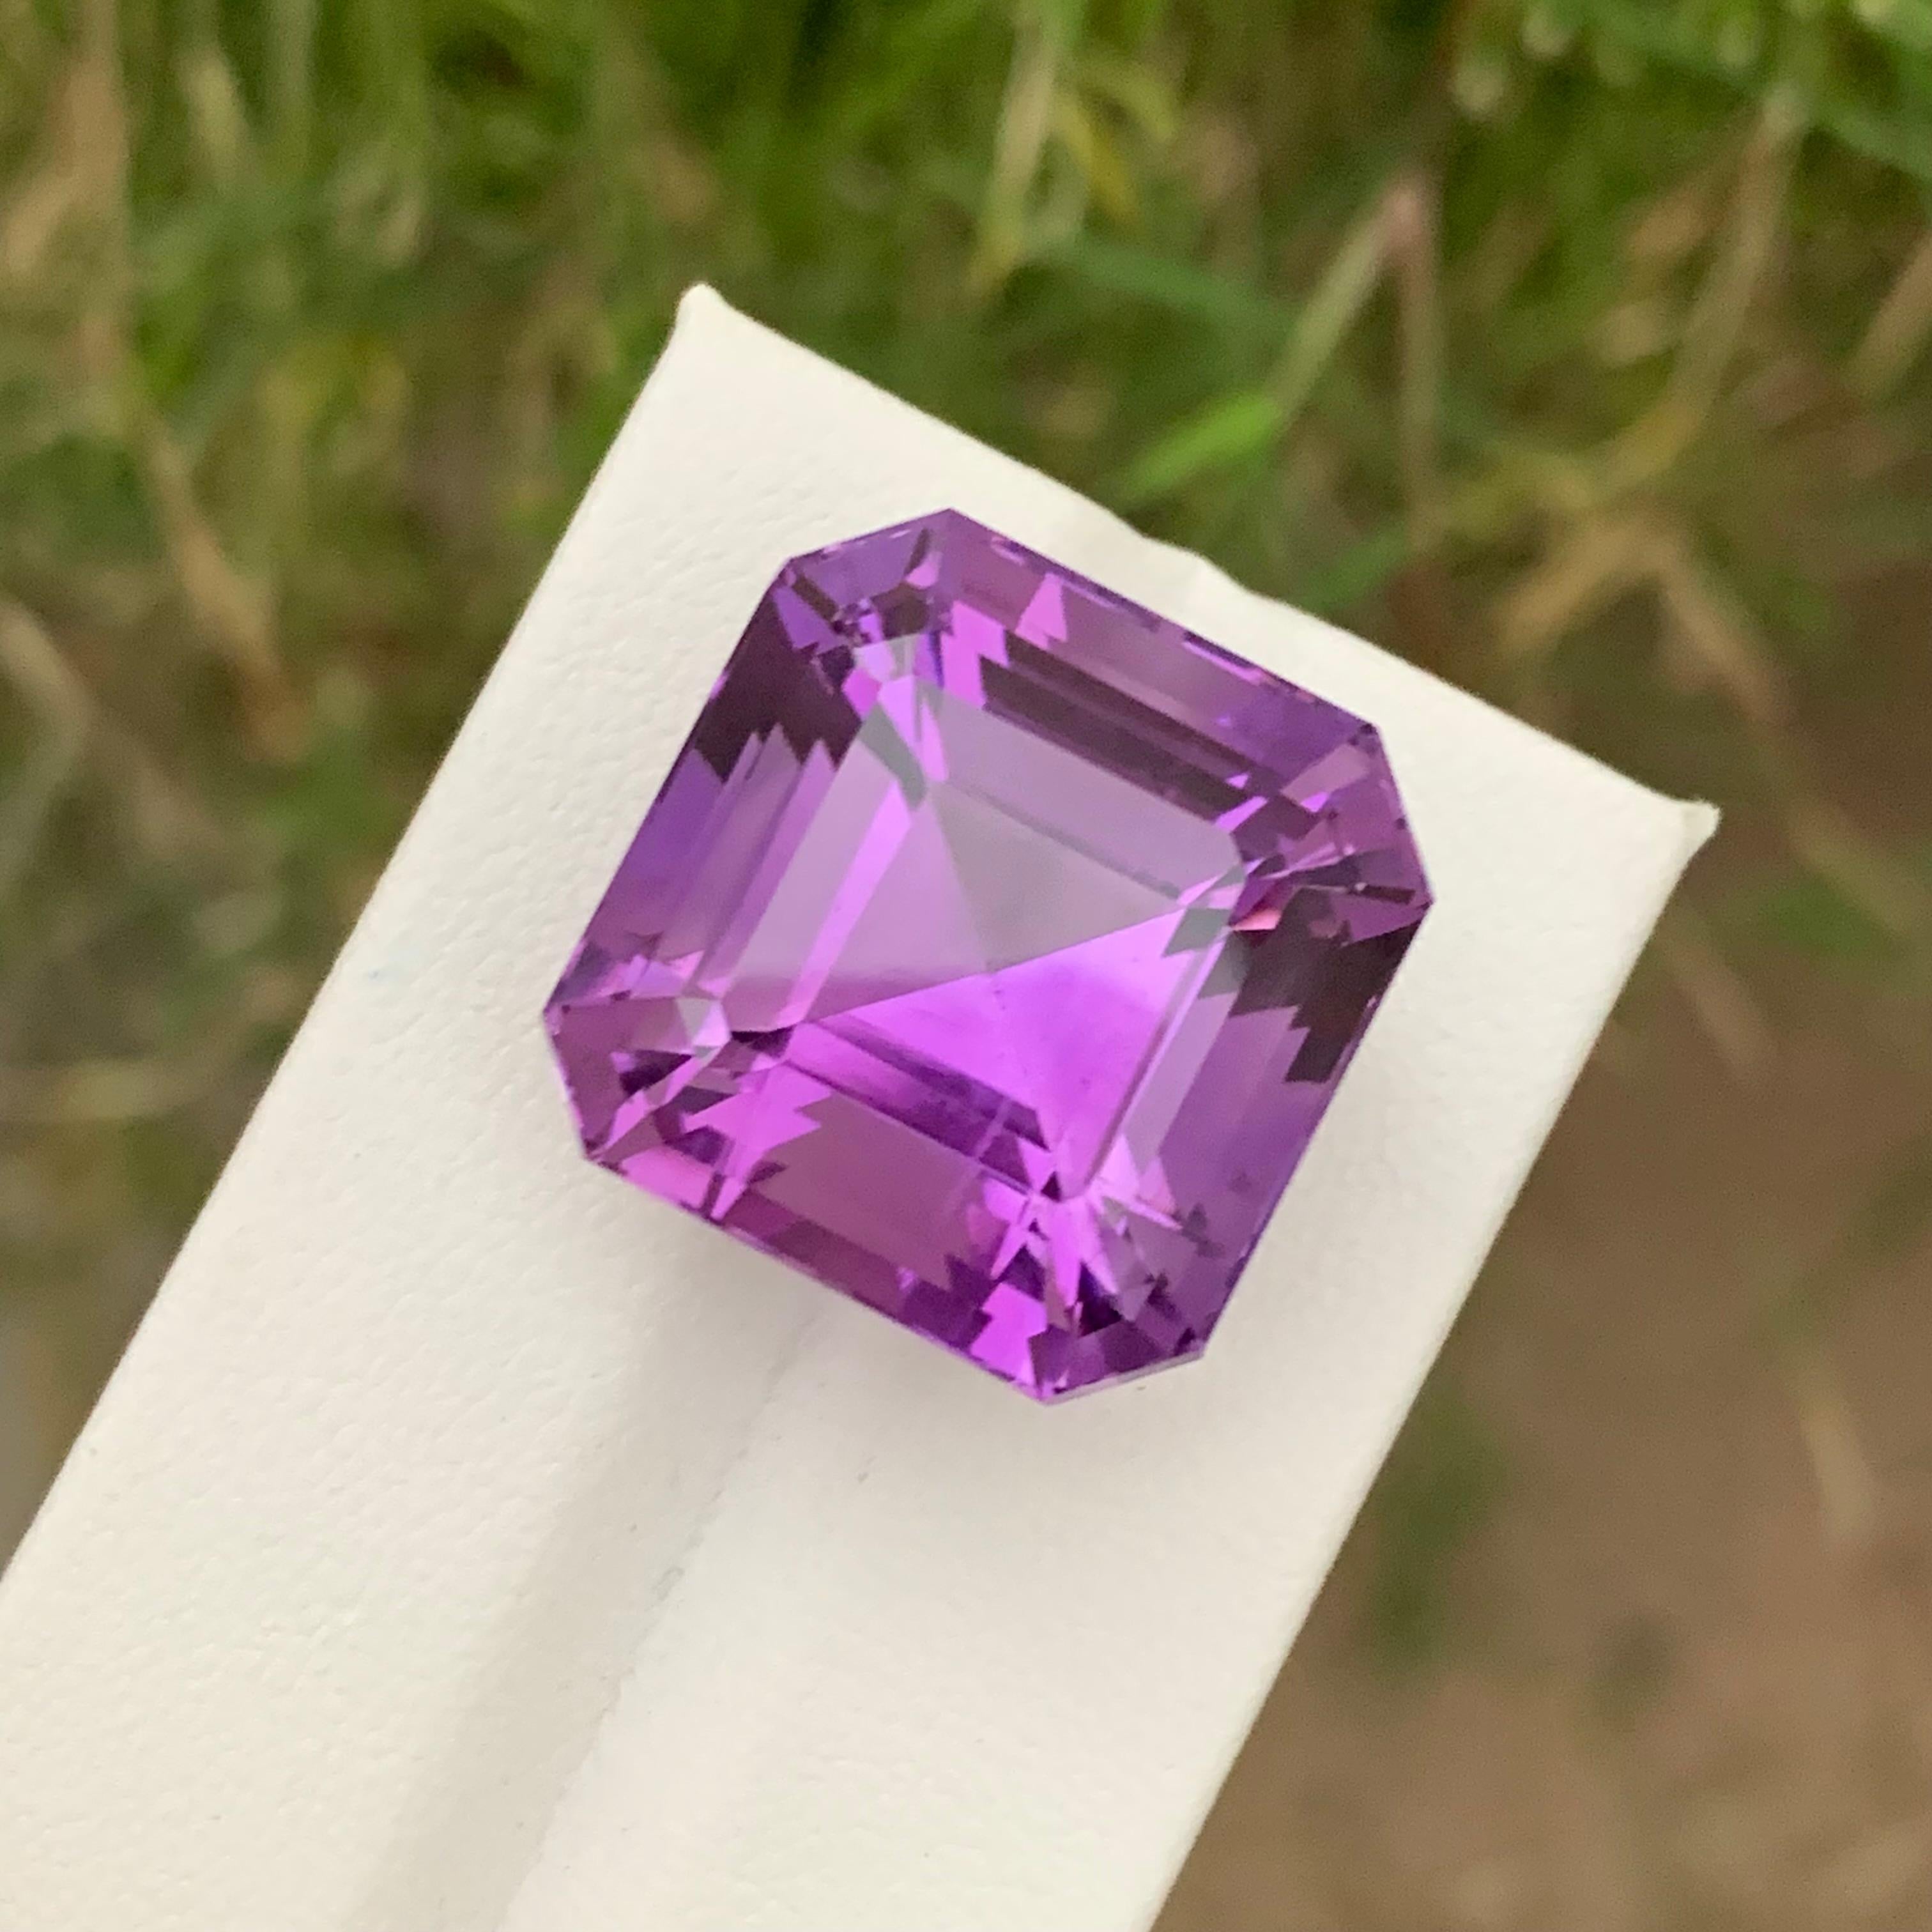 Loose Amethyst 
Weight: 39.70 Carats 
Dimension: 19.1x19.3x16 Mm
Origin: Brazil
Shape: Asscher 
Color: Purple
Treatment: Non
Certificate: On Client Demand
Amethyst is a stunning purple gemstone renowned for its deep, regal hue and spiritual